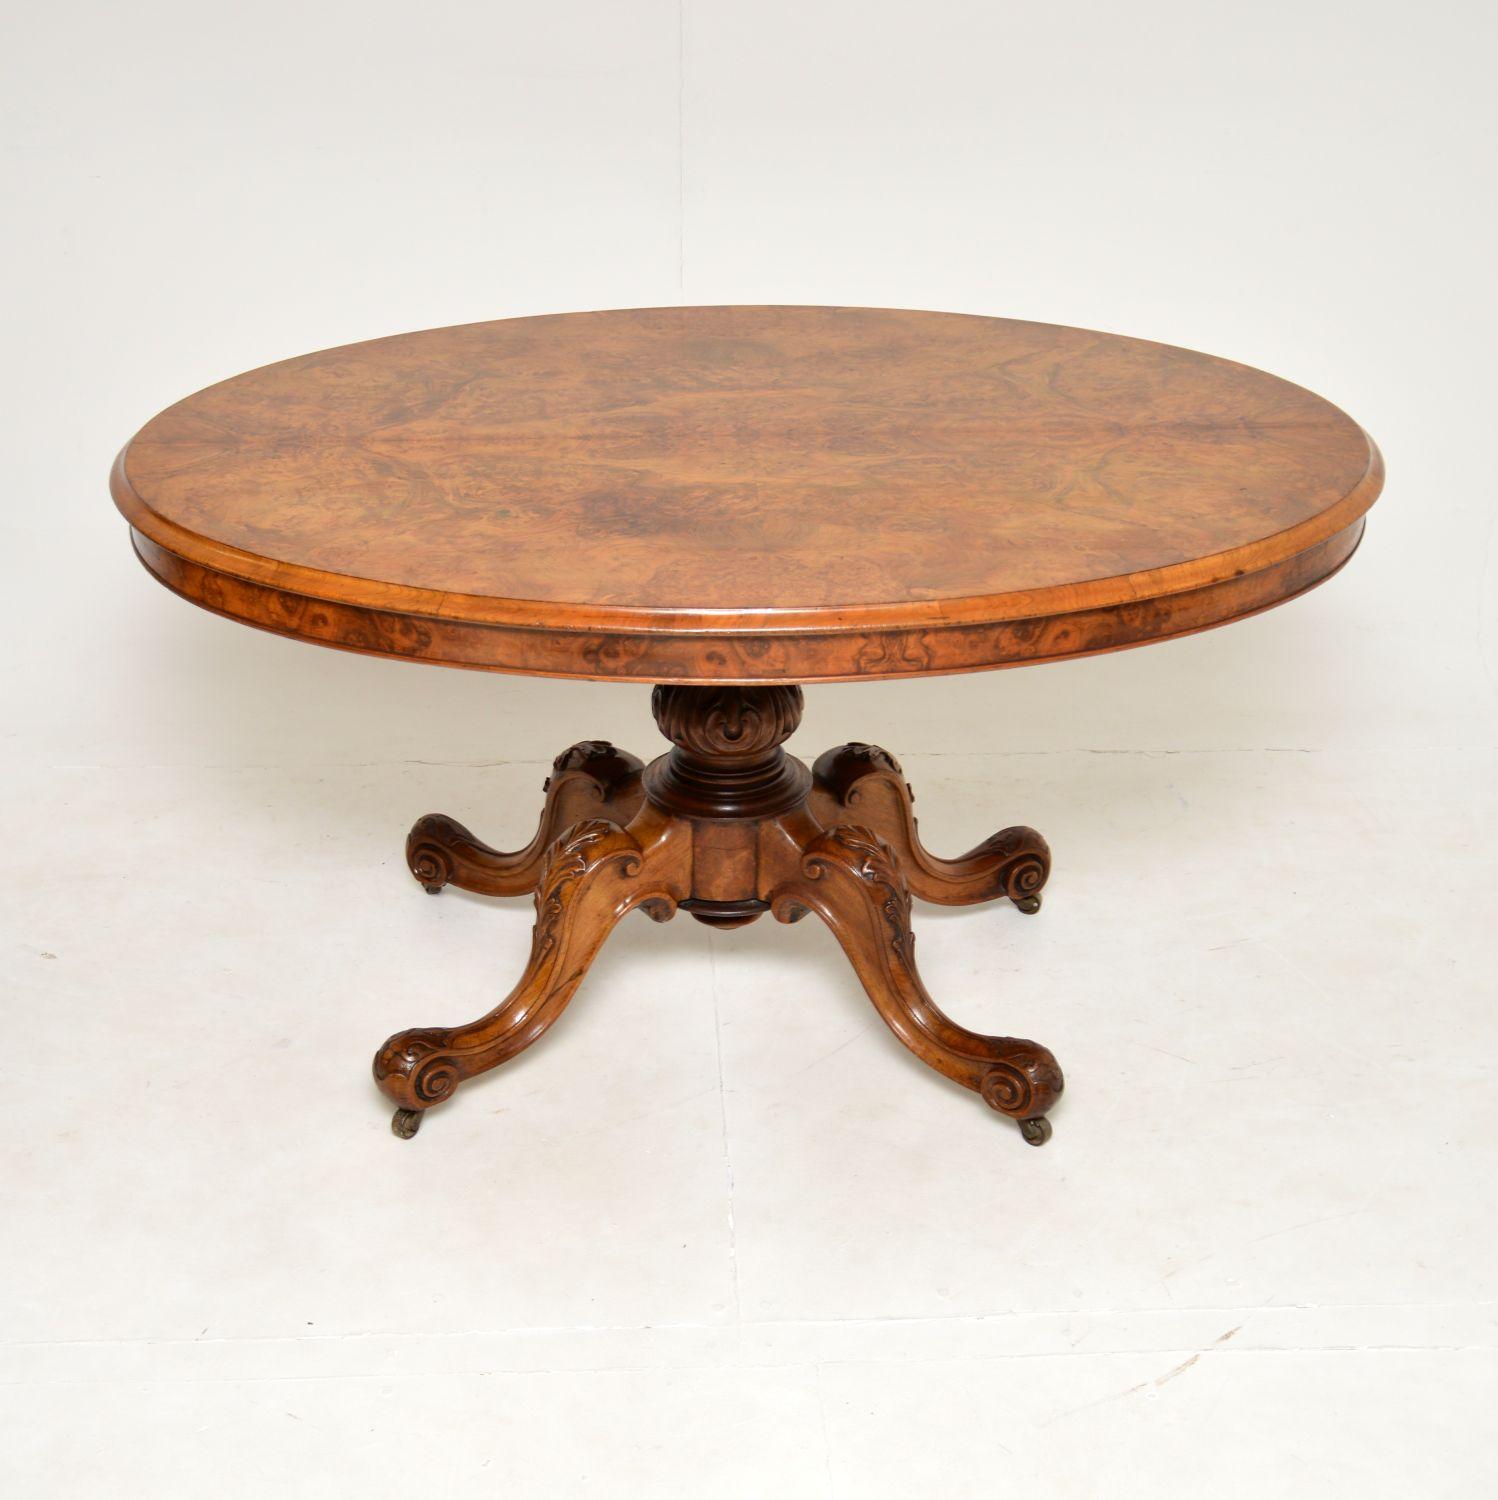 A stunning antique Victorian period dining table in walnut, this was made in England and dates from around 1860-1880.

It is of amazing quality and is a very useful size to be used as a dining table or centre table in a large entry way. The oval